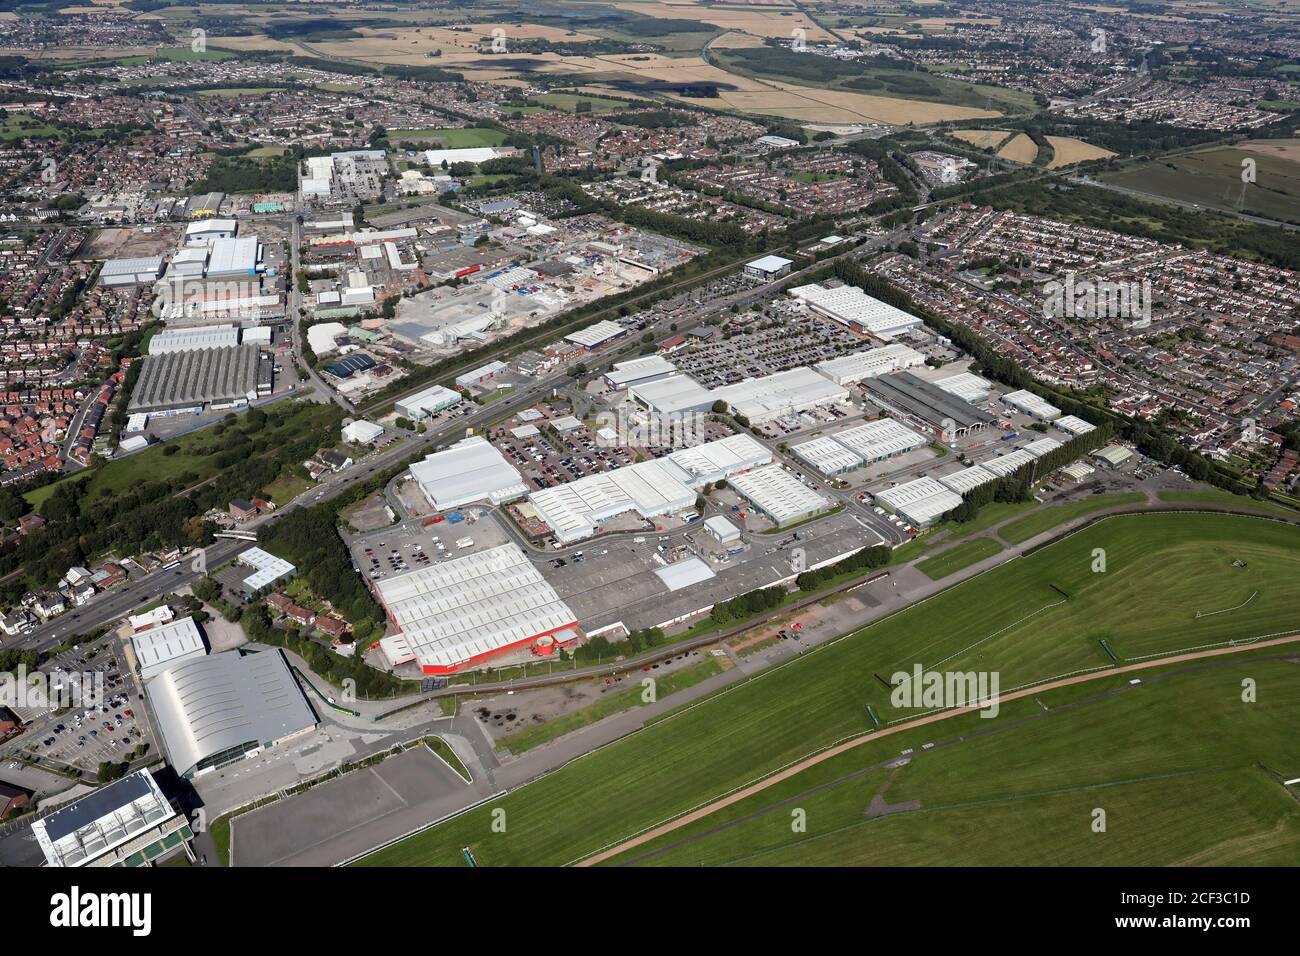 aerial view of Aintree Racecourse Retail & Business Park, Stock Photo